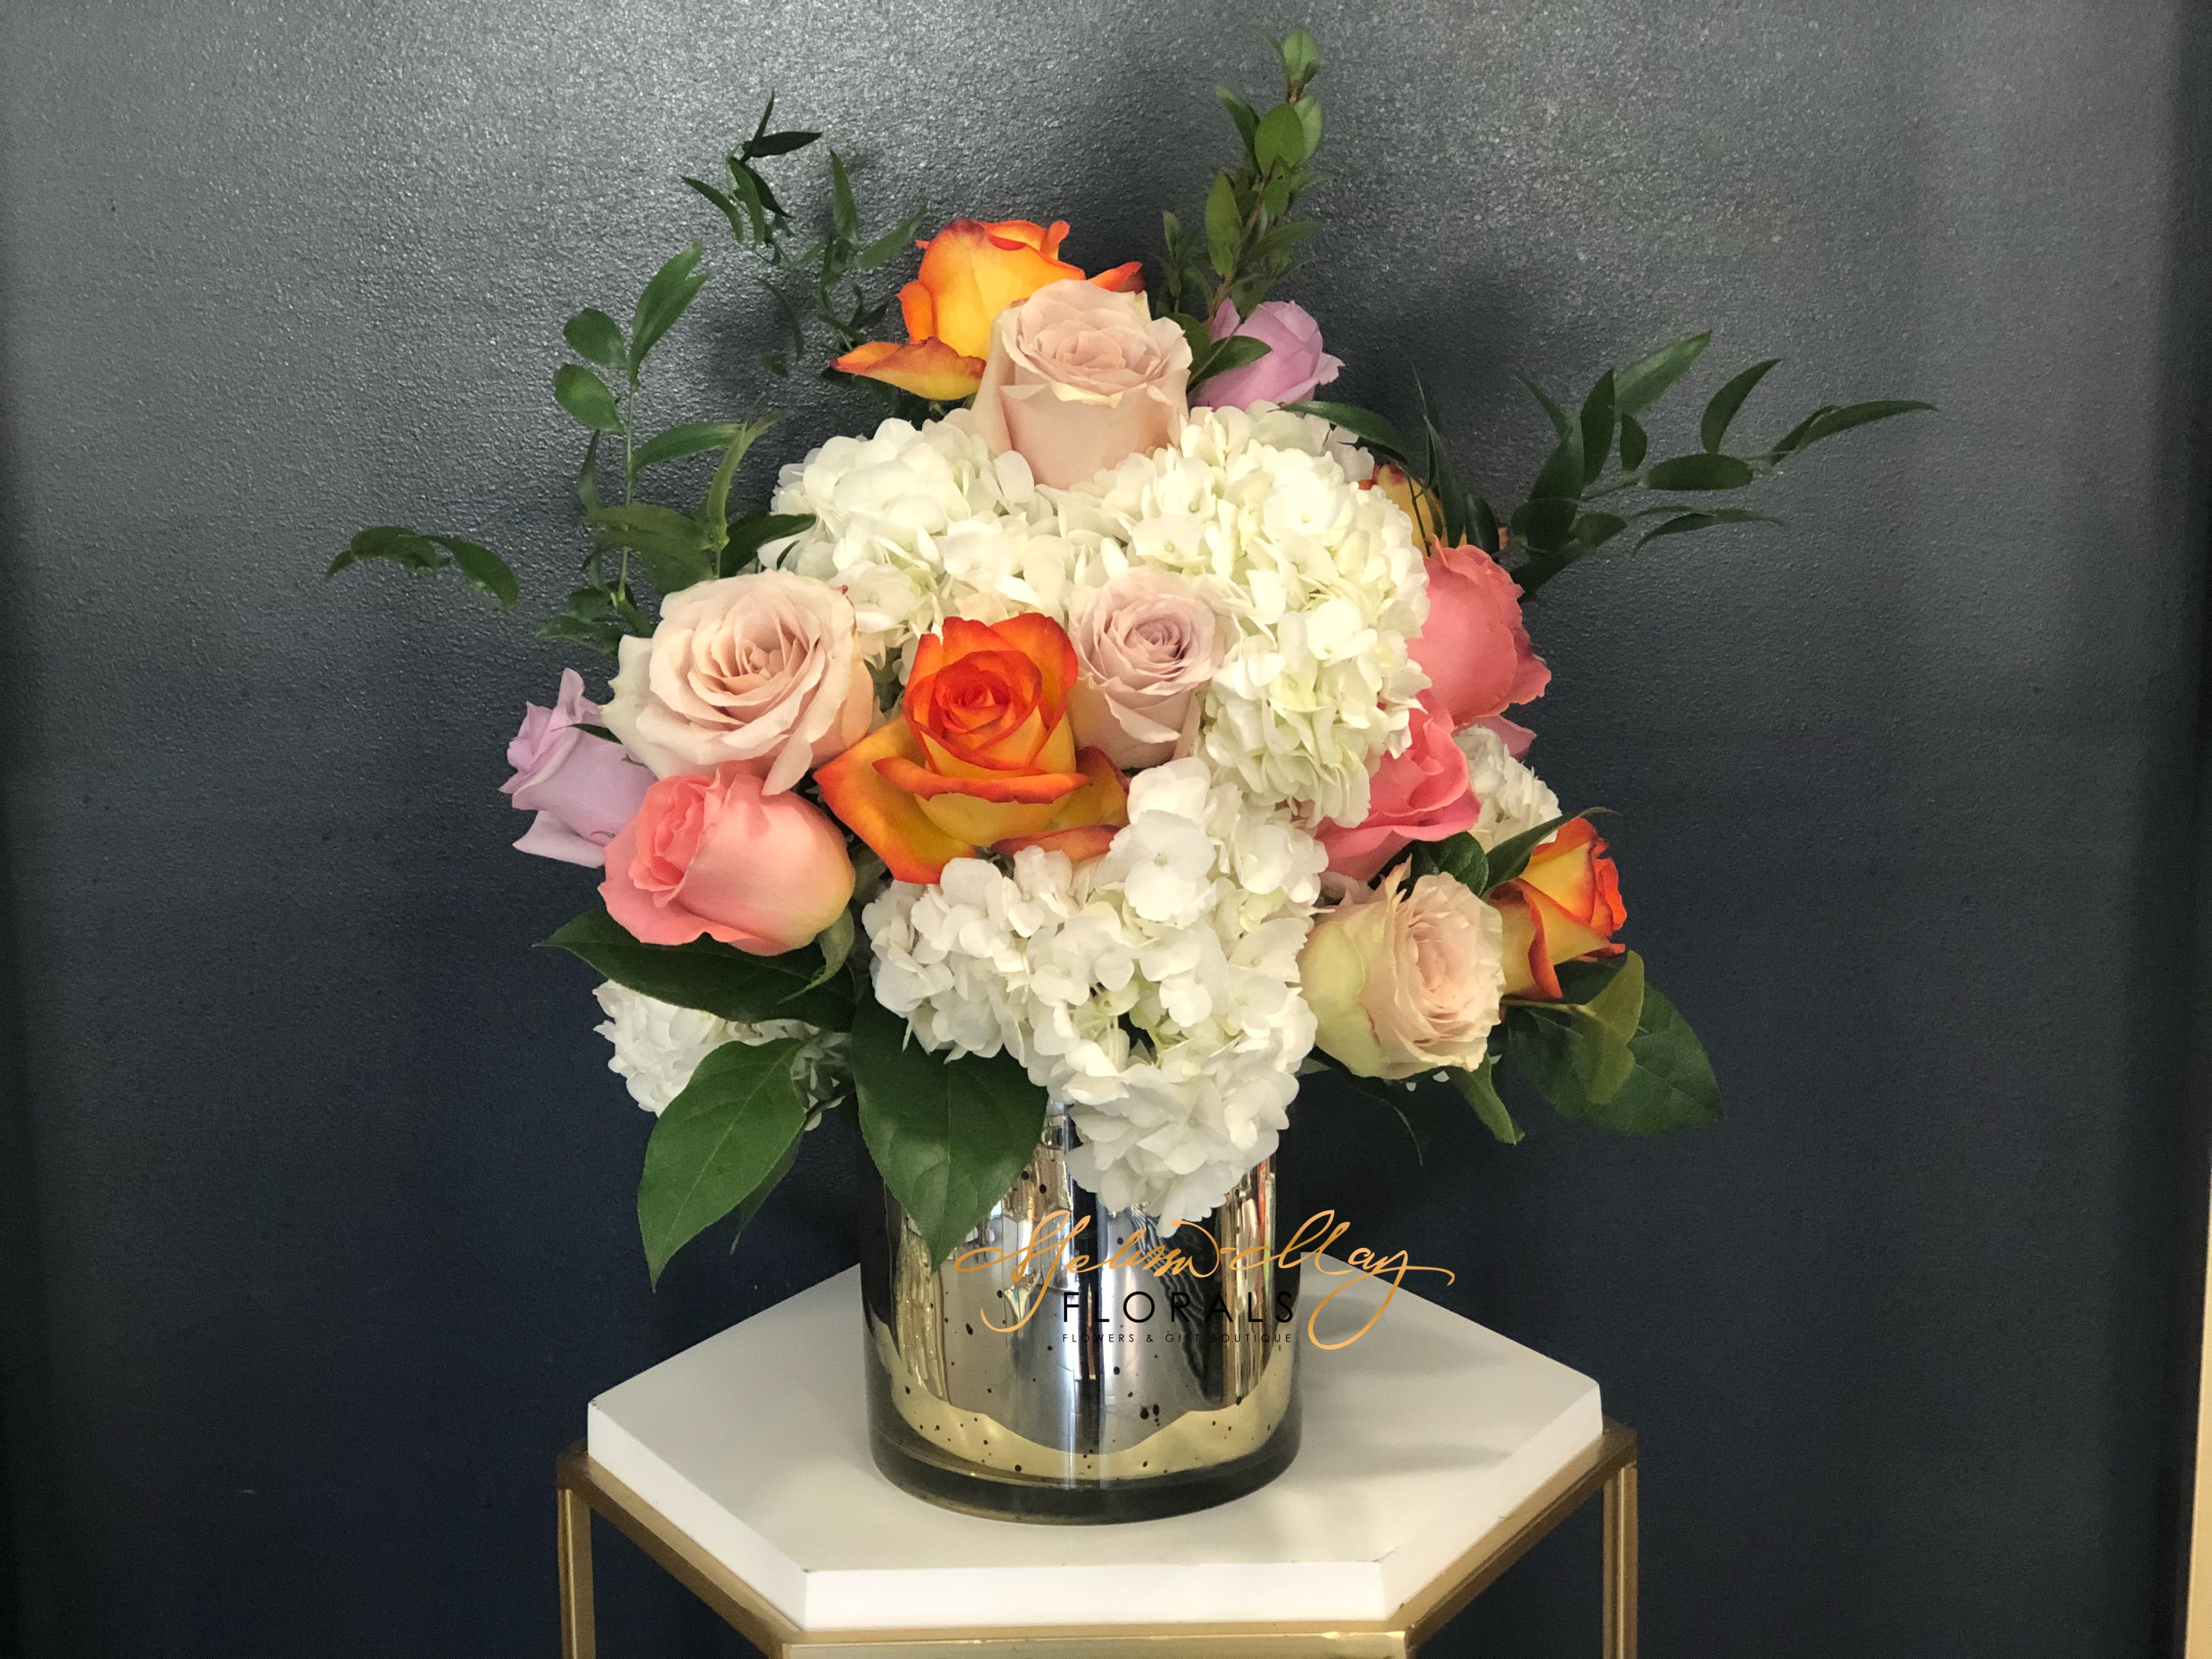 Enchanted Gardens - An all-around arrangement with an assortment of roses and hydrangeas with assorted greenery Artistically designed in a clear glass cylinder vase. Specified which option you prefer to pick from 1 or 2 in special notes. (Deluxe Shown)